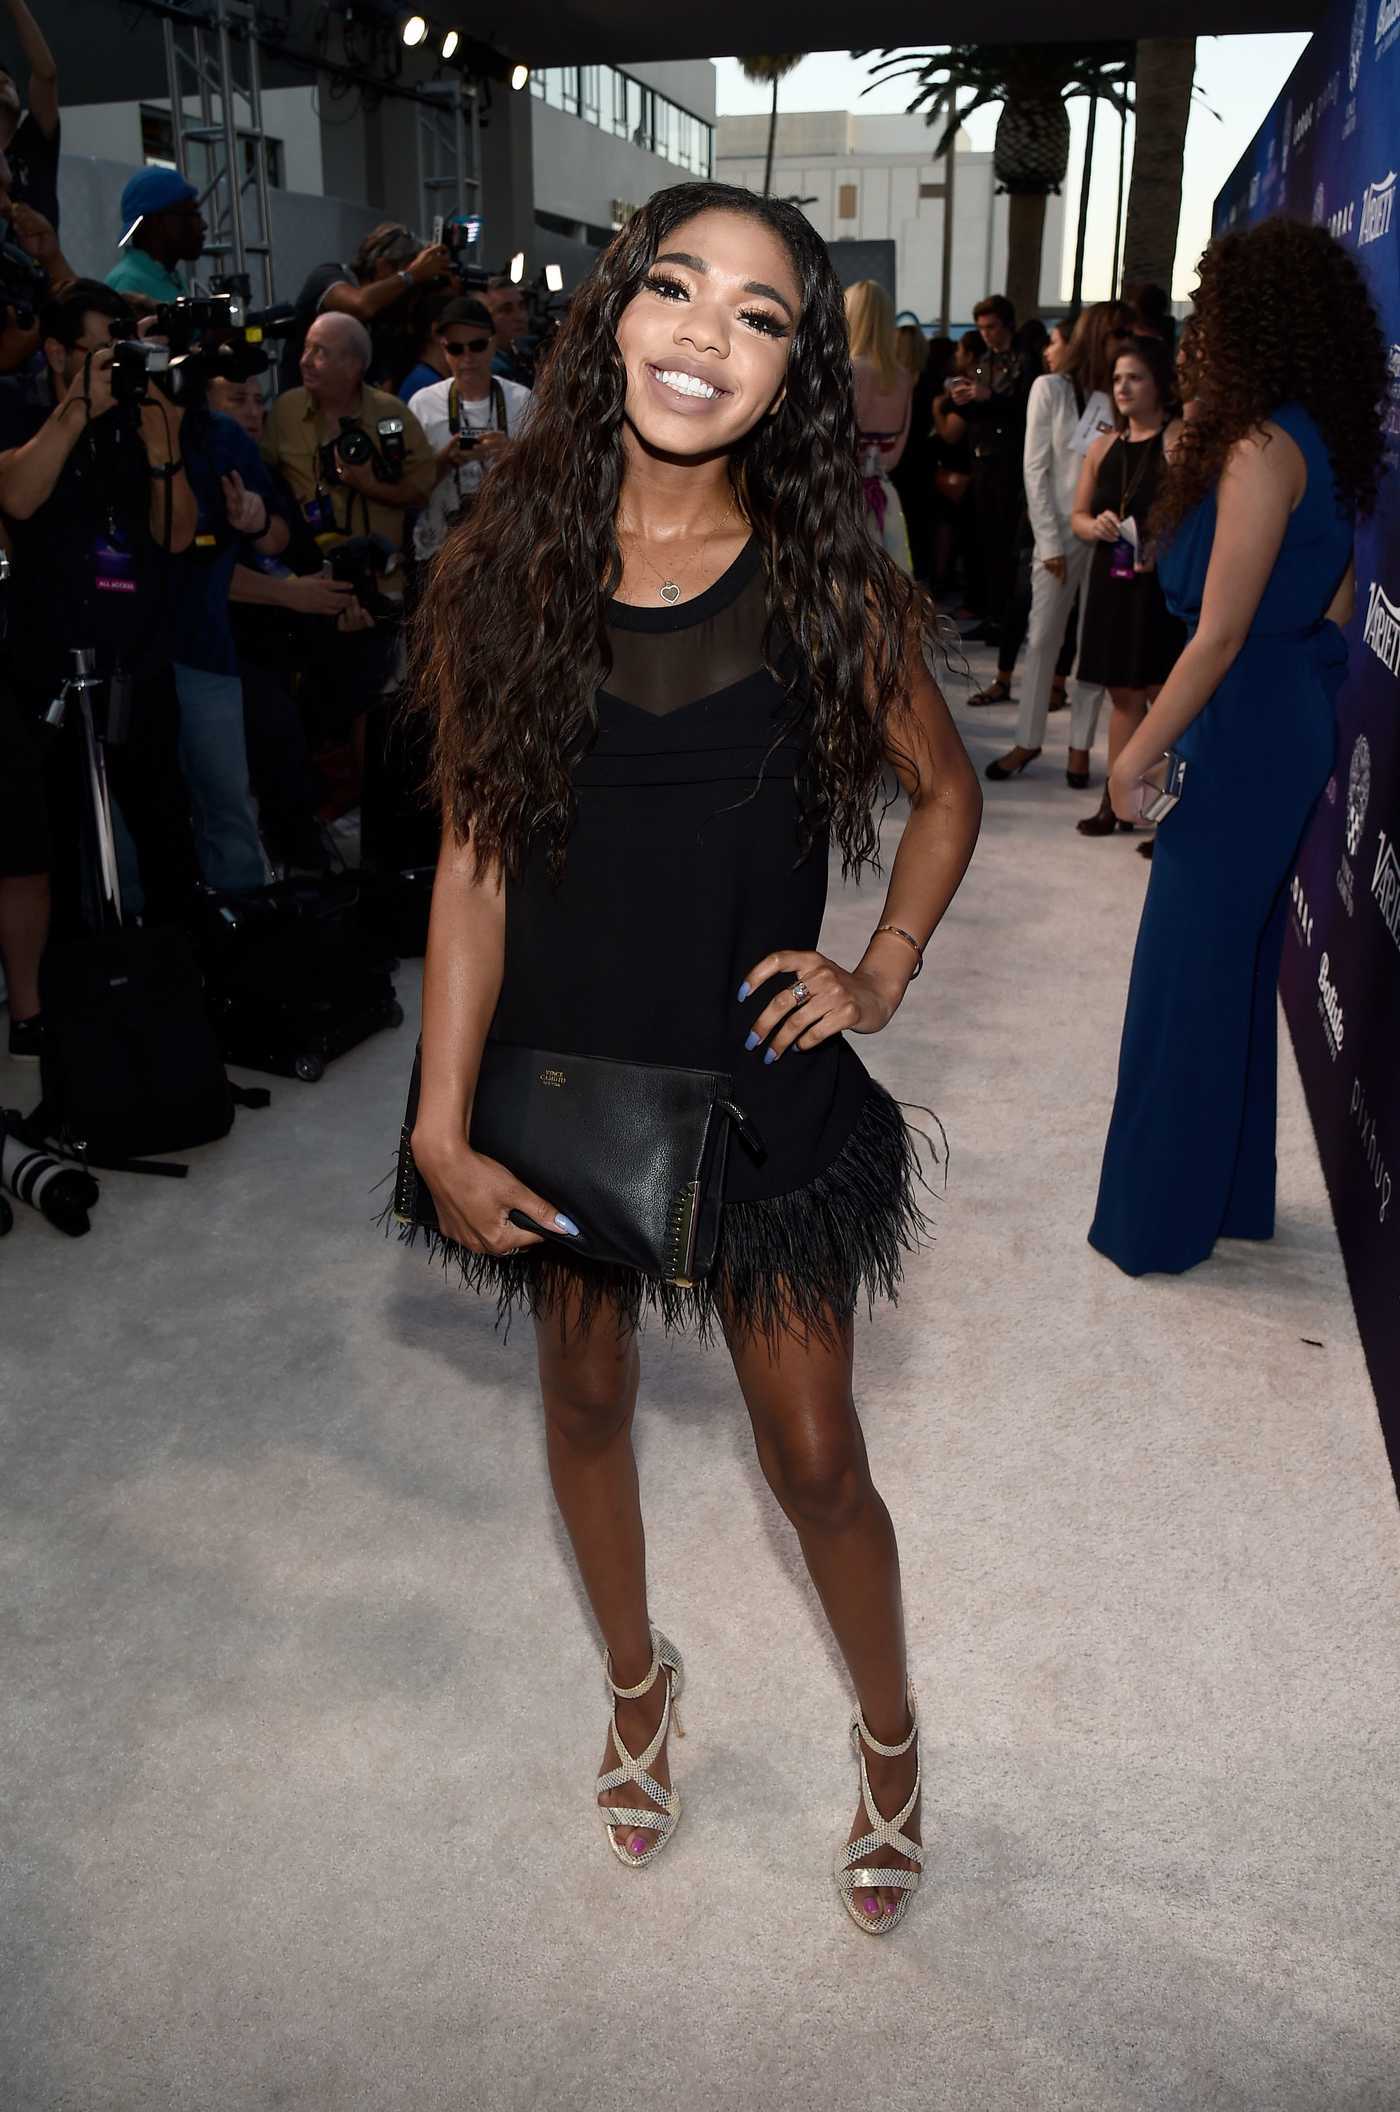 Teala Dunn at Variety's Power of Young Hollywood Presented by Pixhug in Los Angeles 08/16/2016